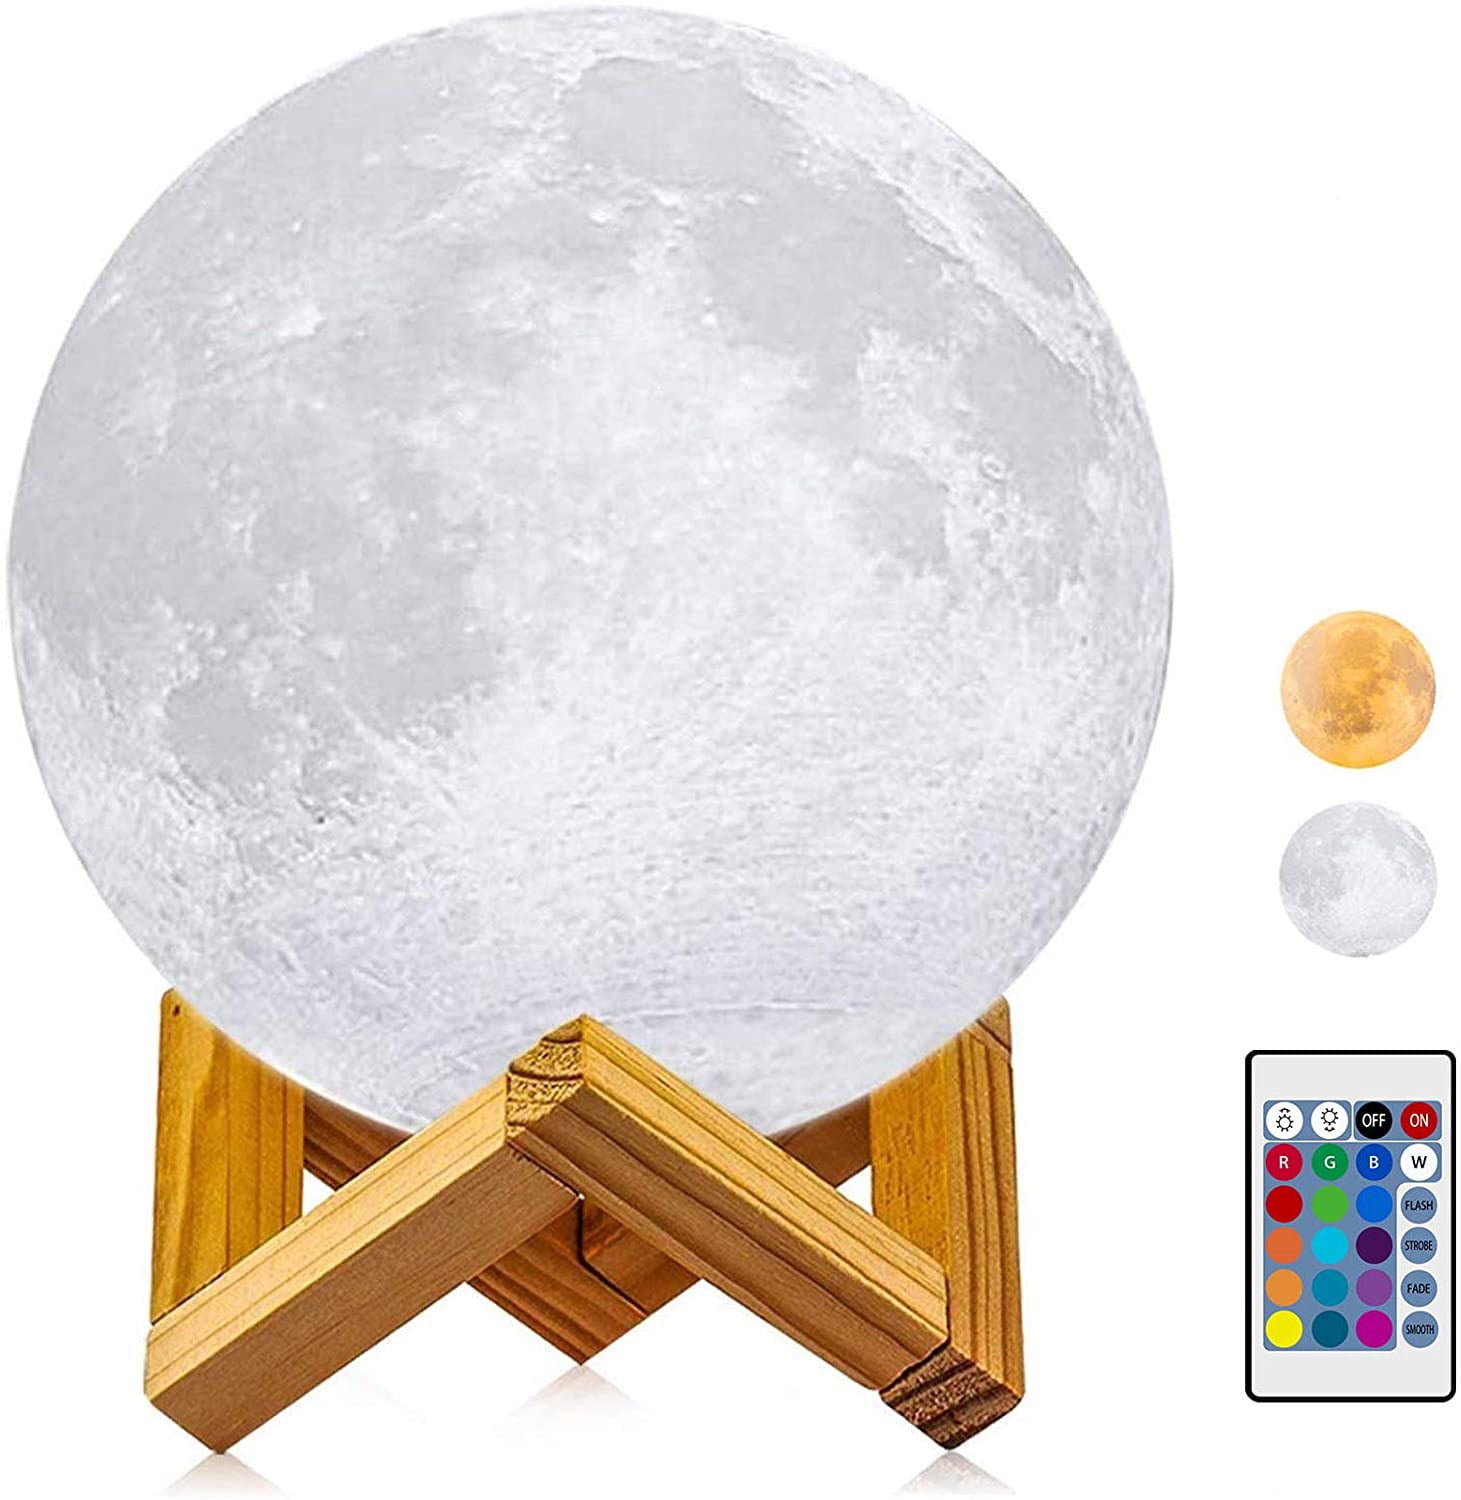 Details about   Rechargeable LED Night Light Remote Control 16 Color 3D Printing Moonlight Lamp 